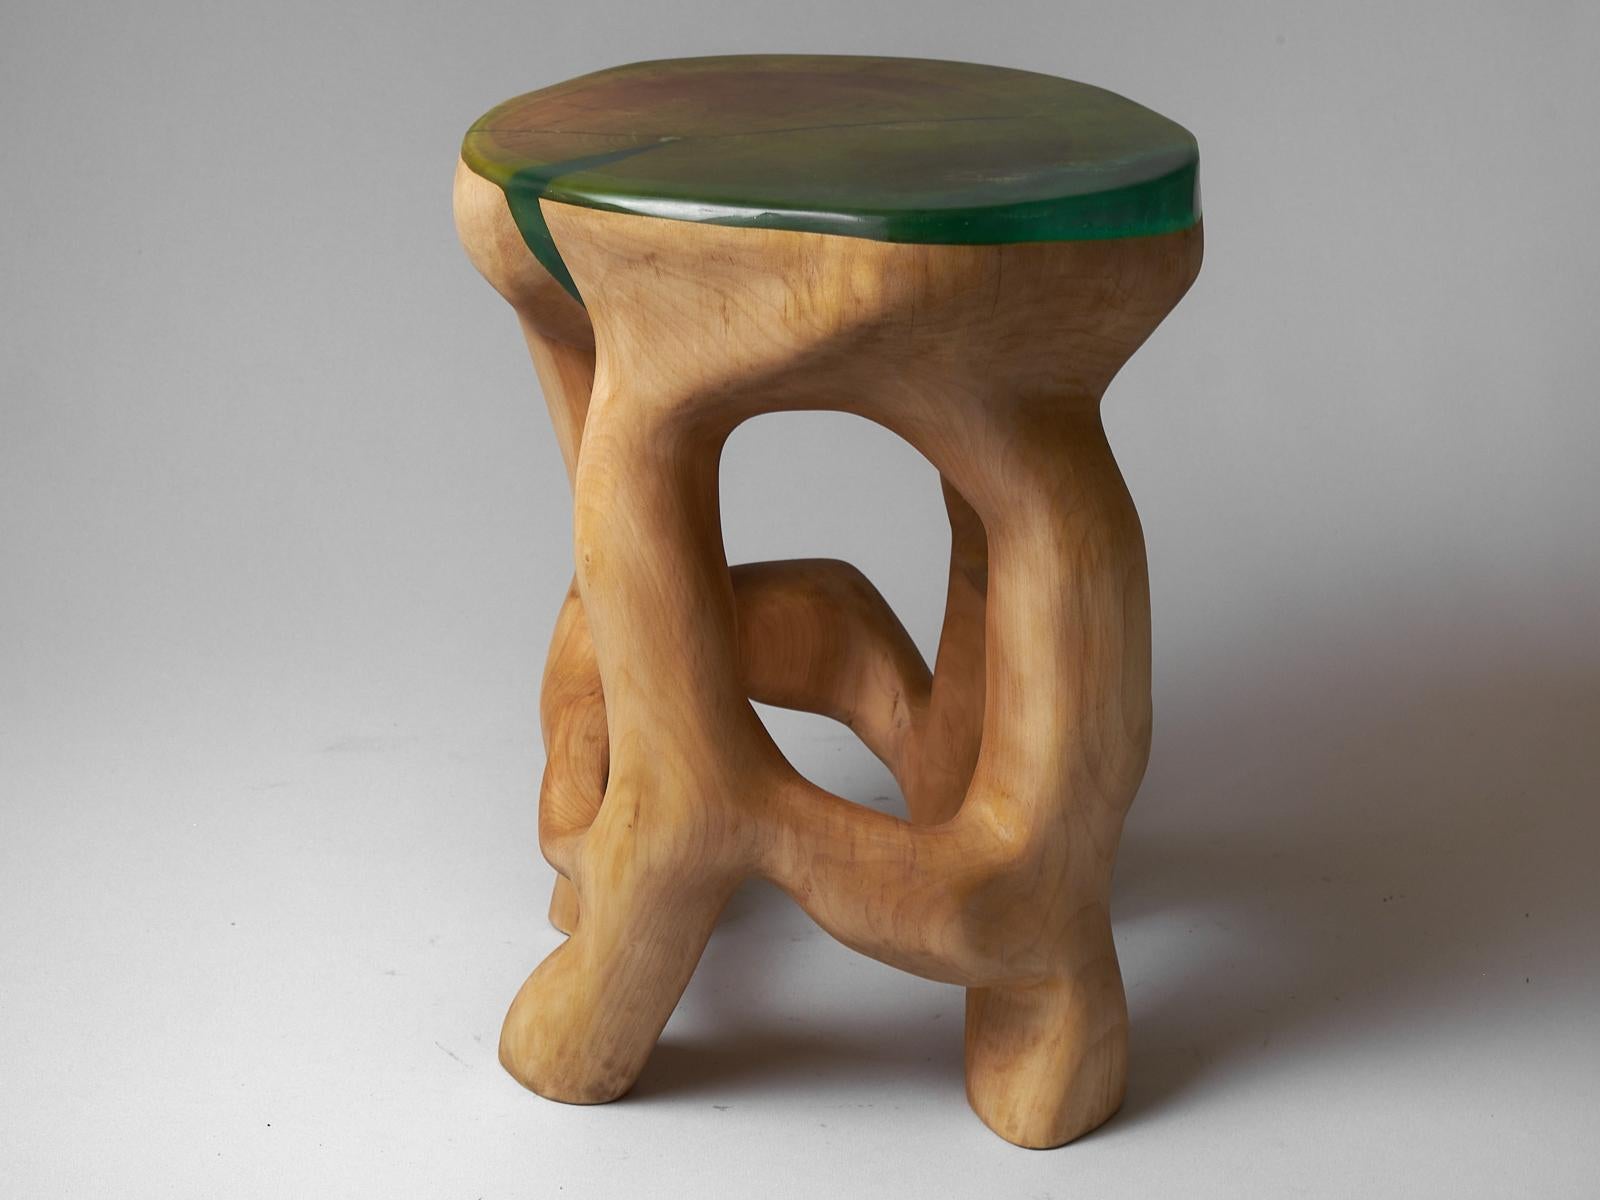 Unique chainsaw carved wooden functional sculpture usable as a multifunctional piece such as, tabouret, side table, night stand or even pedestal for your art. Carved from a single piece of wood and protected with the highest quality oils, ensuring